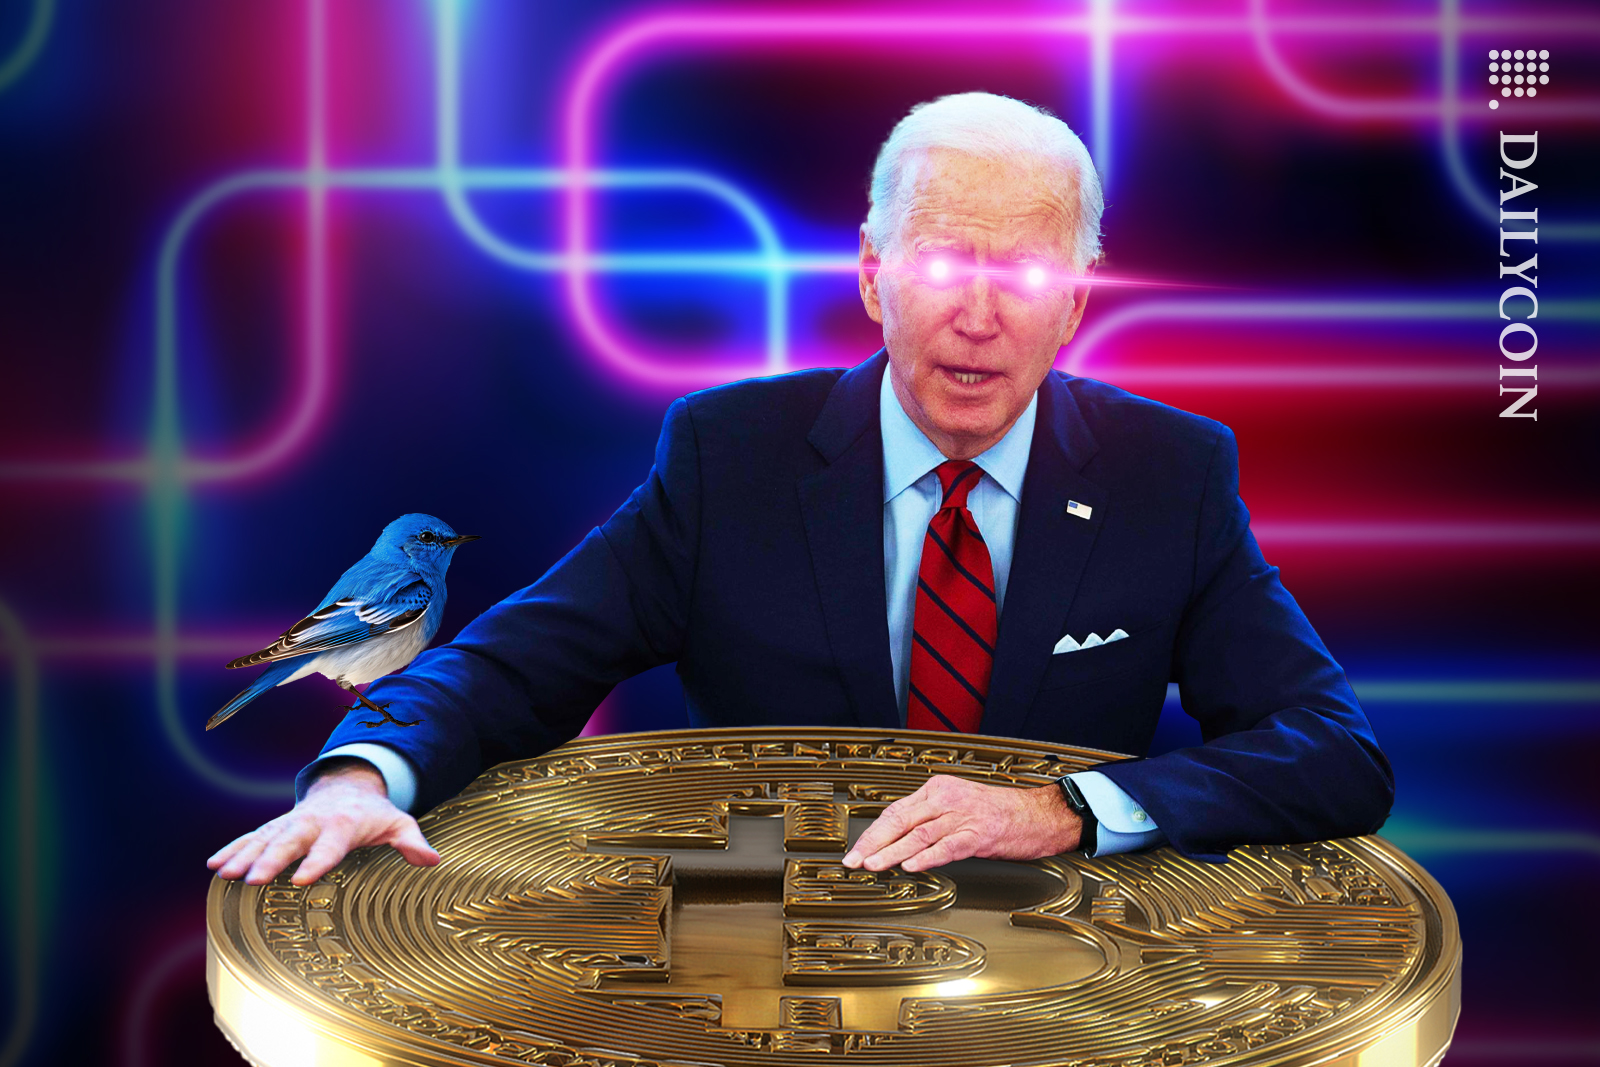 President Biden with laser eyes, resting hands on a Bitcoin, with a Twitter bird listening on his arm.